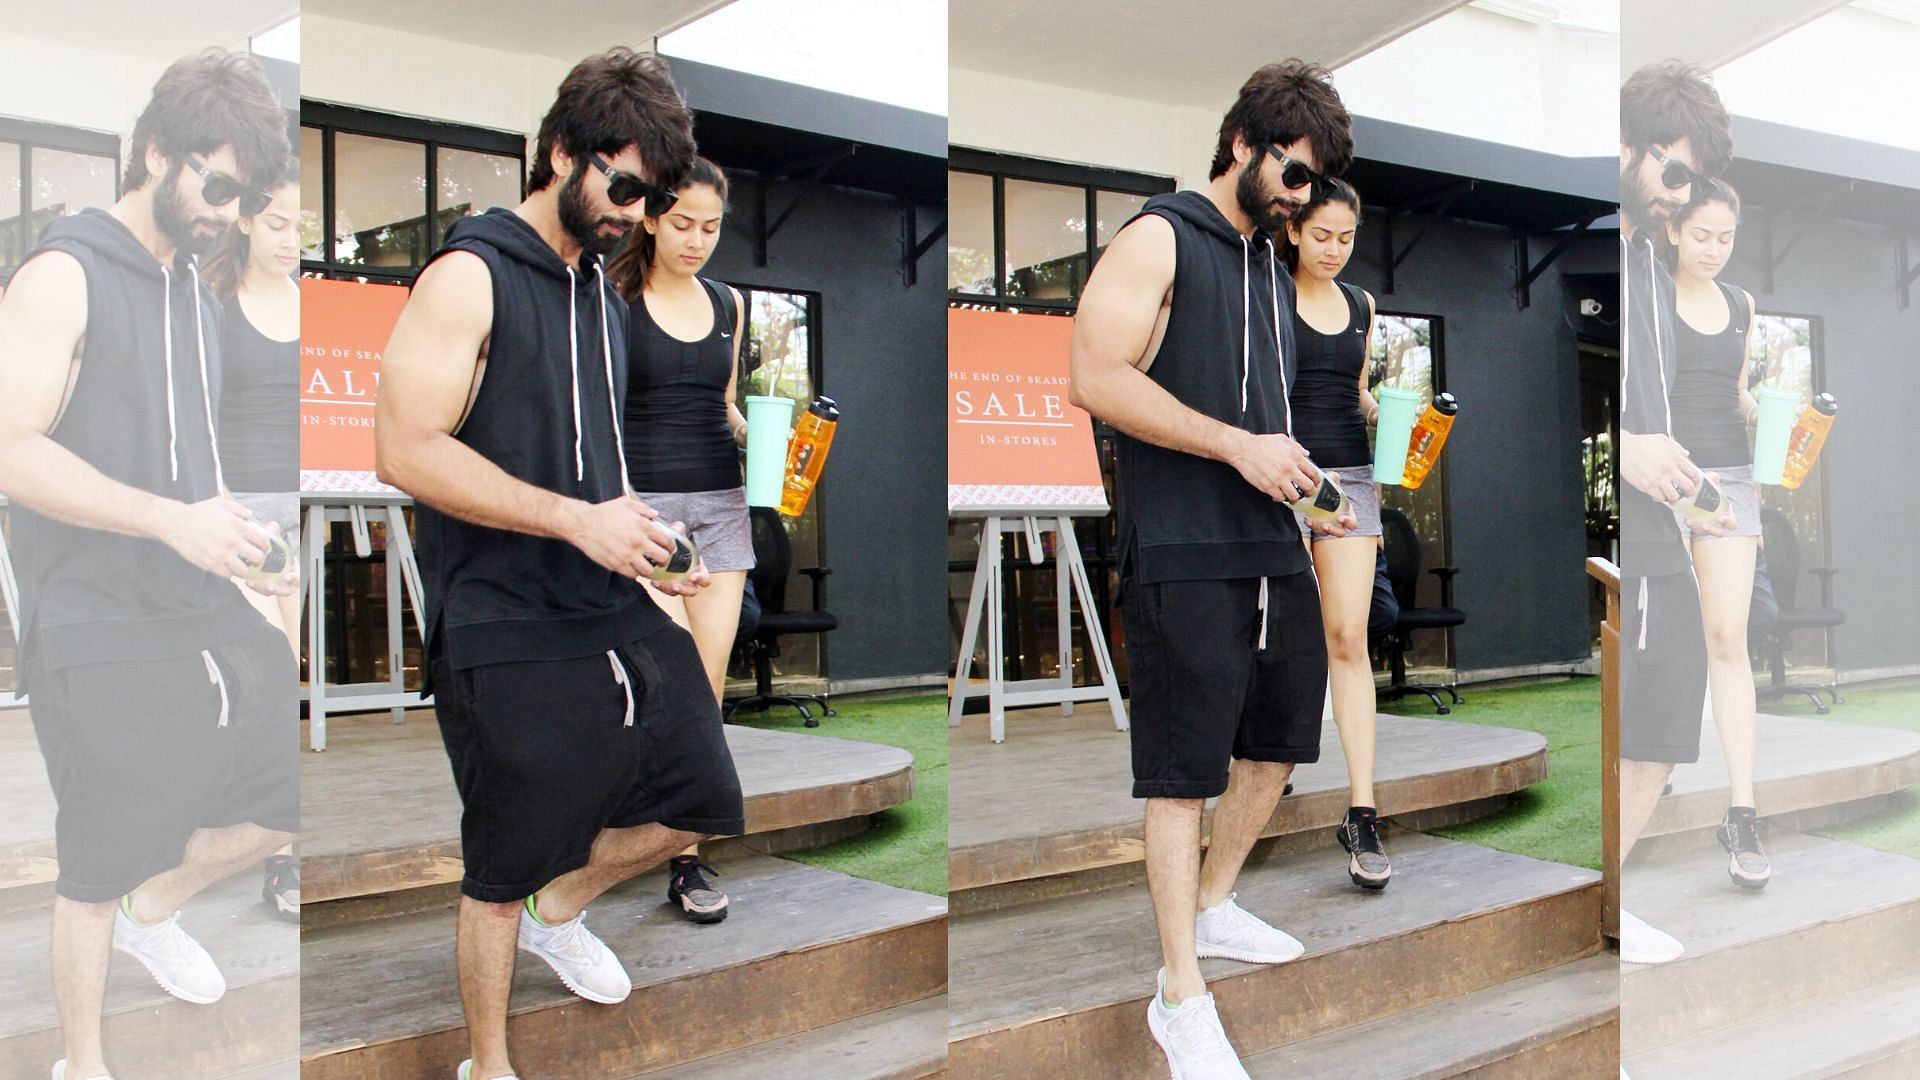 Archival photograph of Shahid Kapoor and Mira Rajput coming out of a gym.